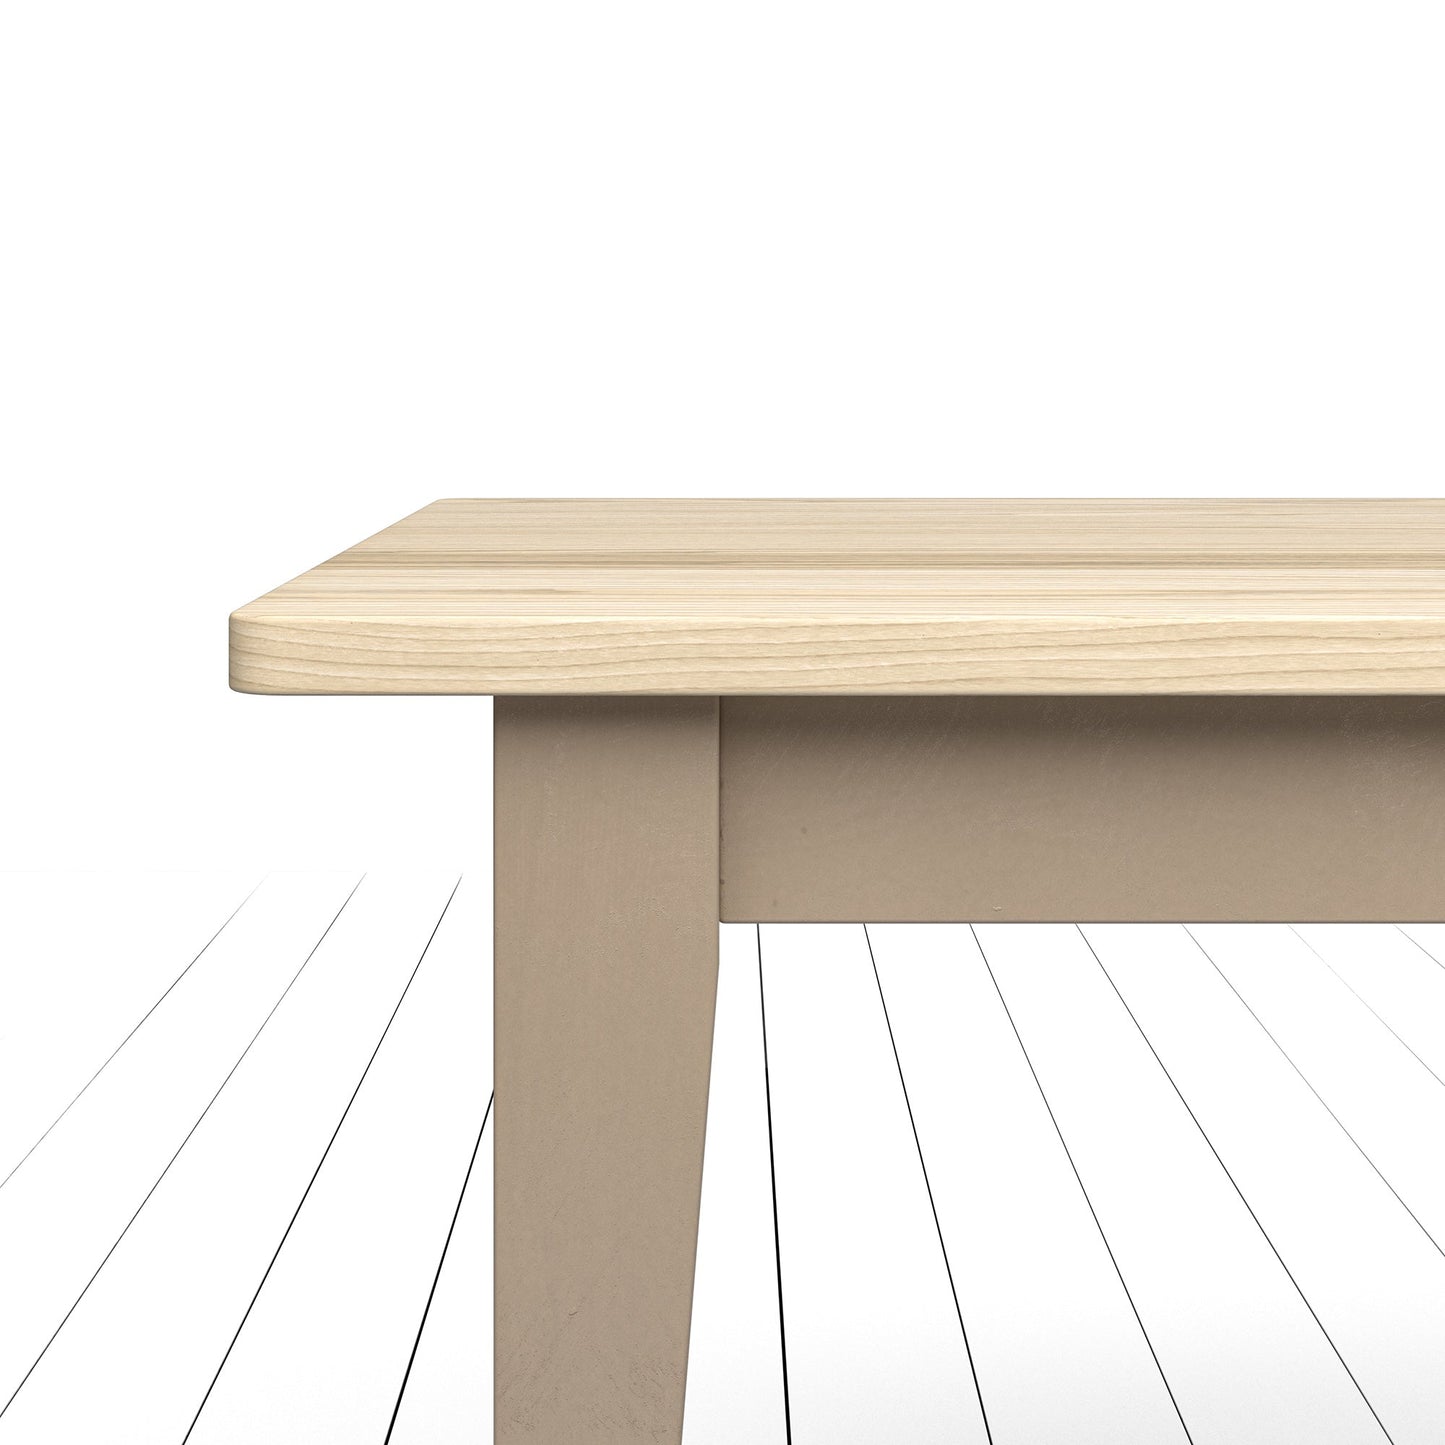 A Home furniture Ash Farmhouse Table by Kiki with a wooden top on a wooden floor for Interior decor.